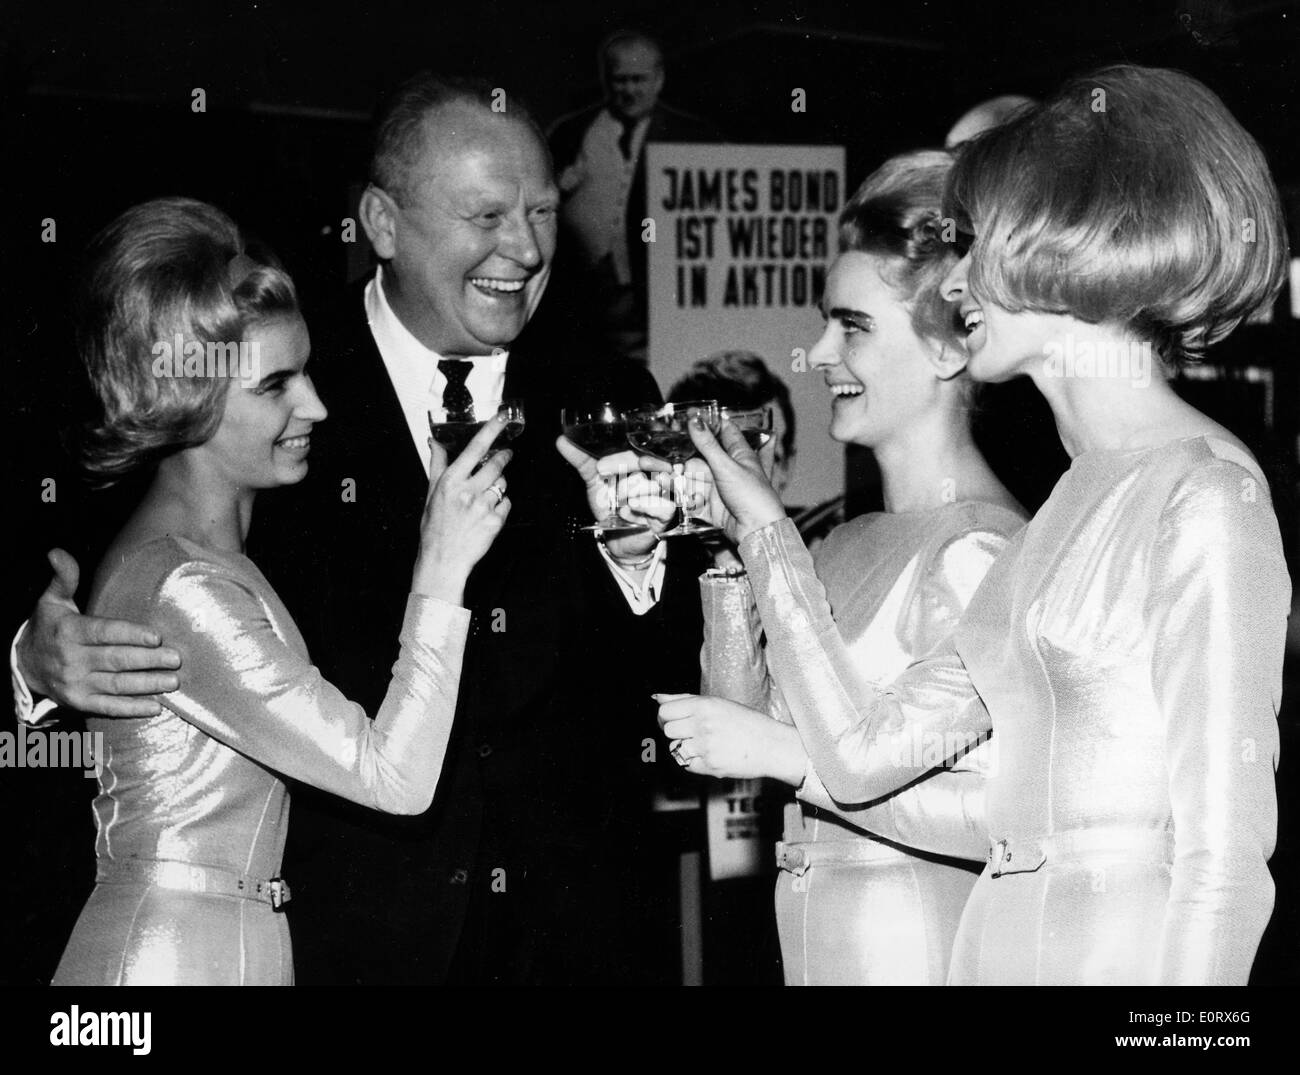 Actor Gert Frobe chats with women at party Stock Photo